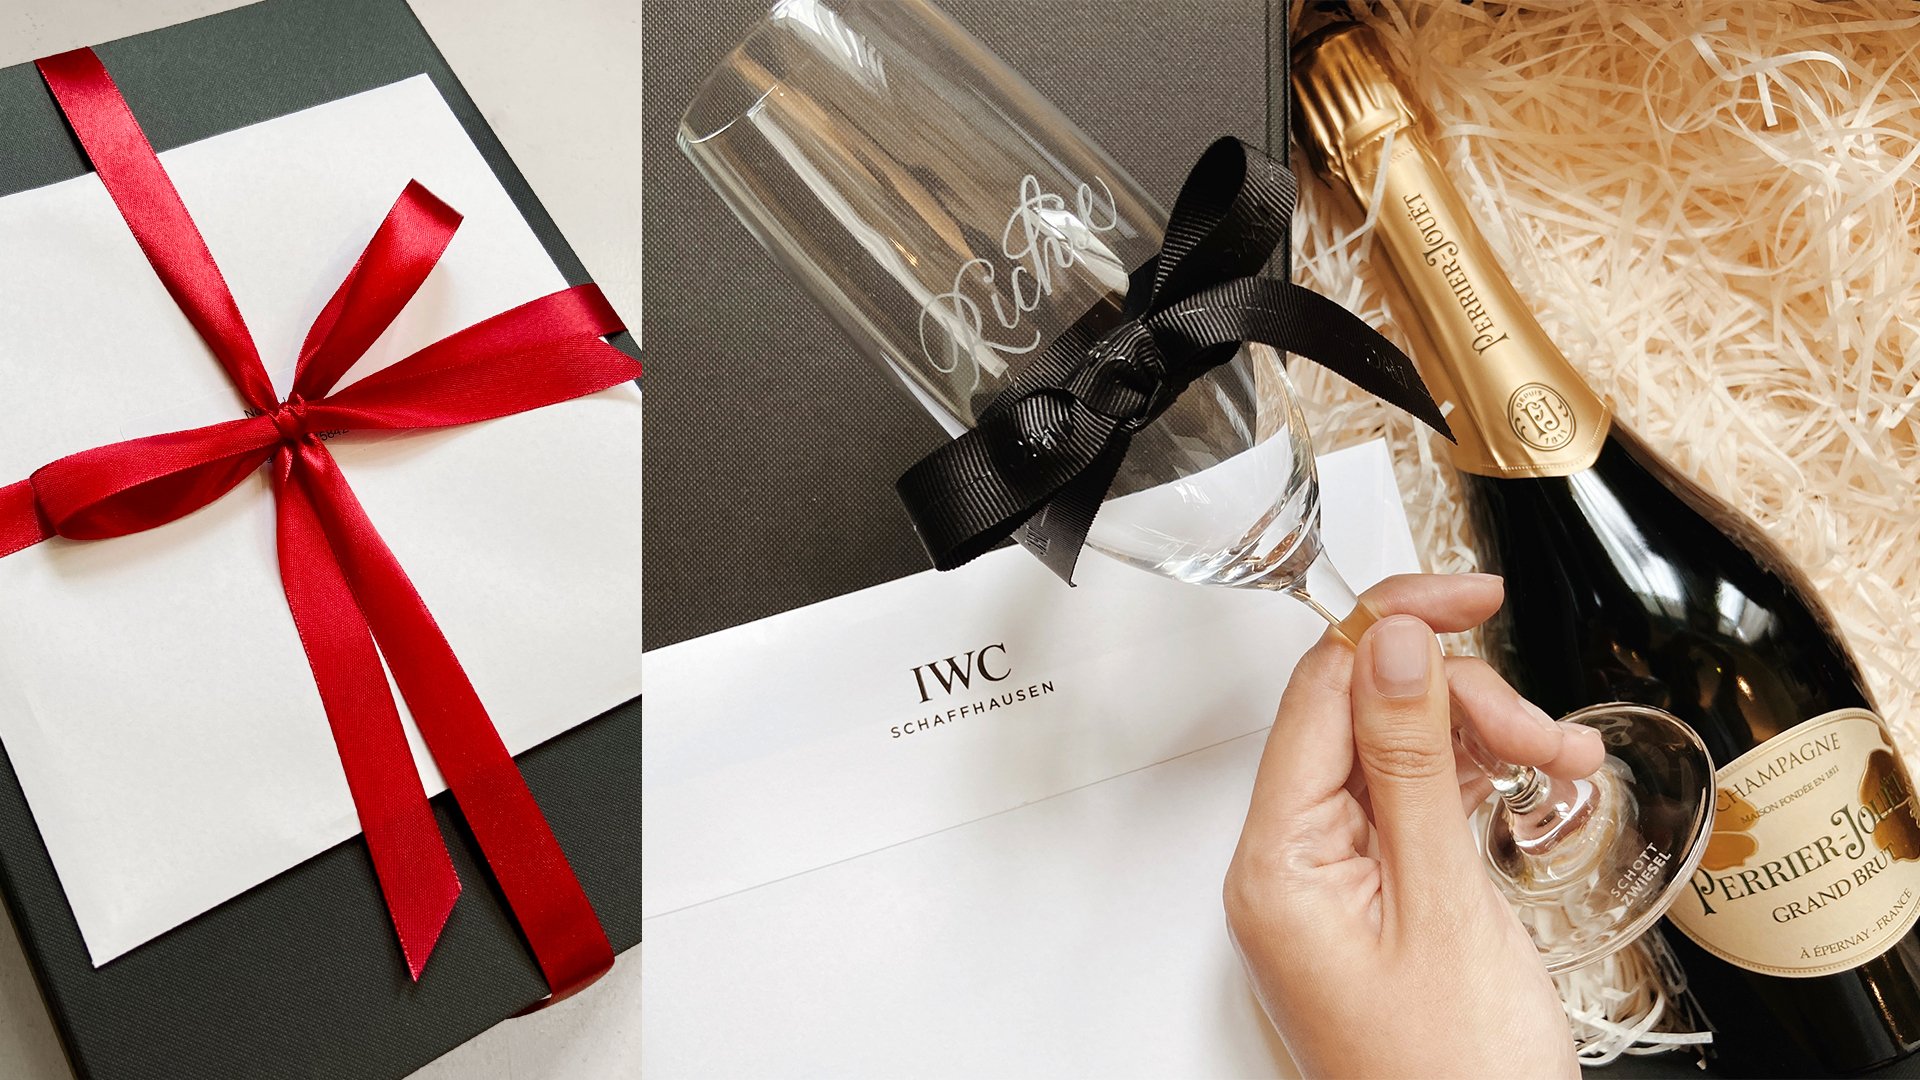 IWC Schaffhausen, Richemont | Xmas Corporate & PR Gifting: Engraved Champagne Flute & Champagne Set